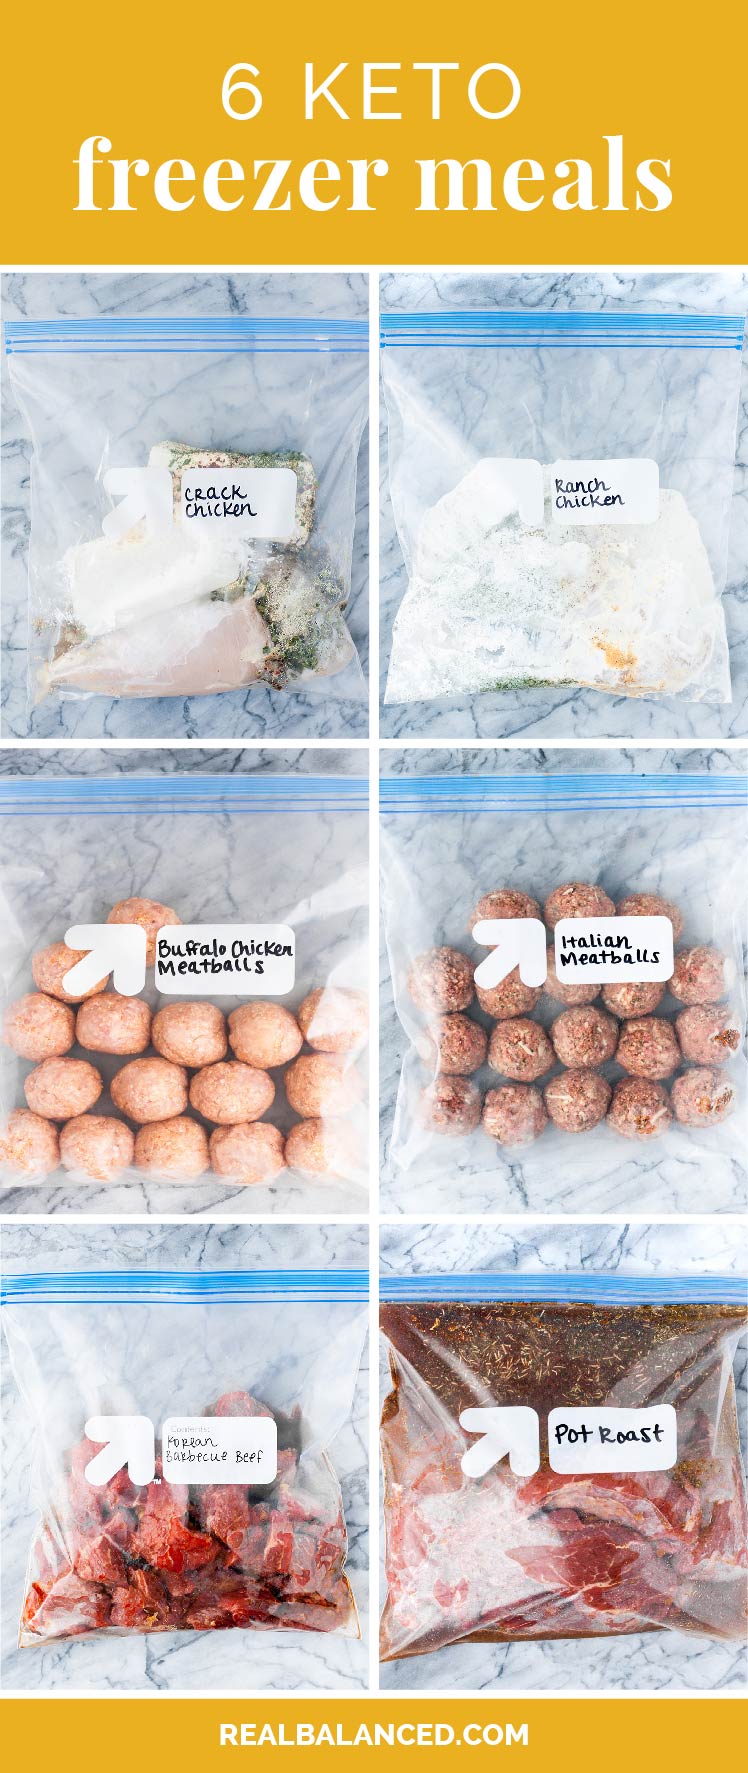 Keto Freezer Meals: Instant Pot and Slow Cooker